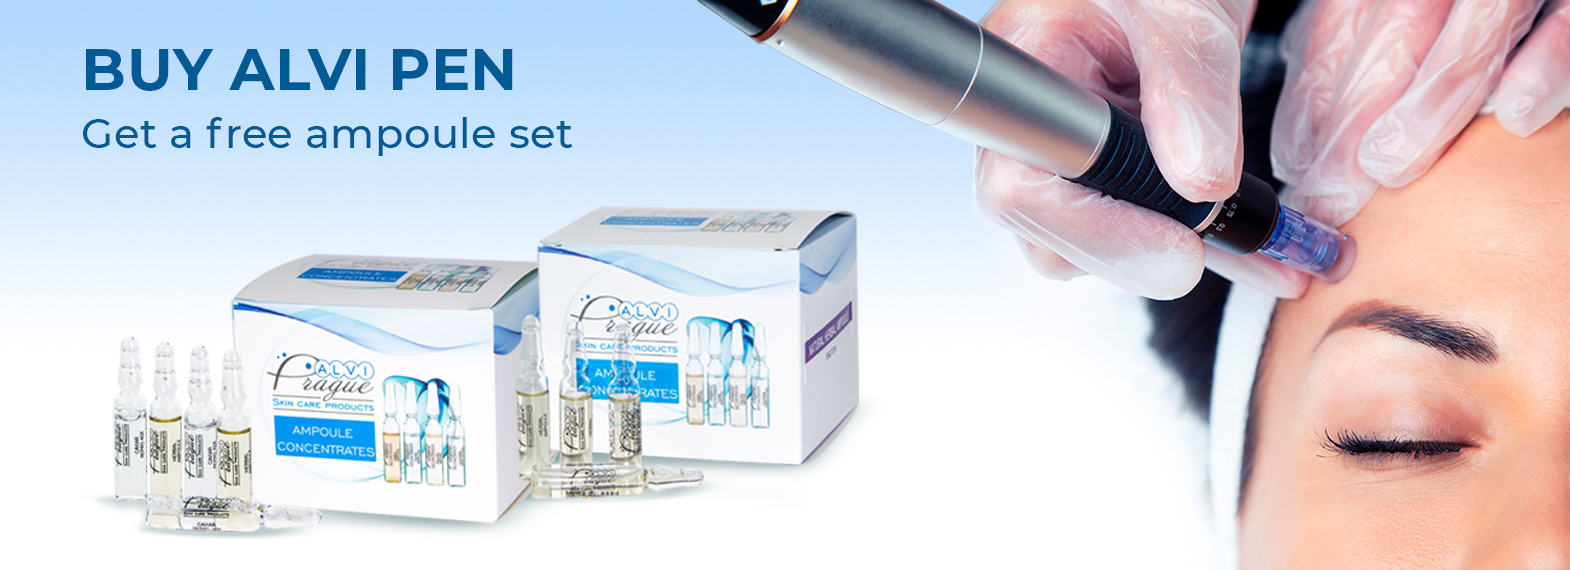 Ampoules concentrates for any aesthetic skin issues as a gift